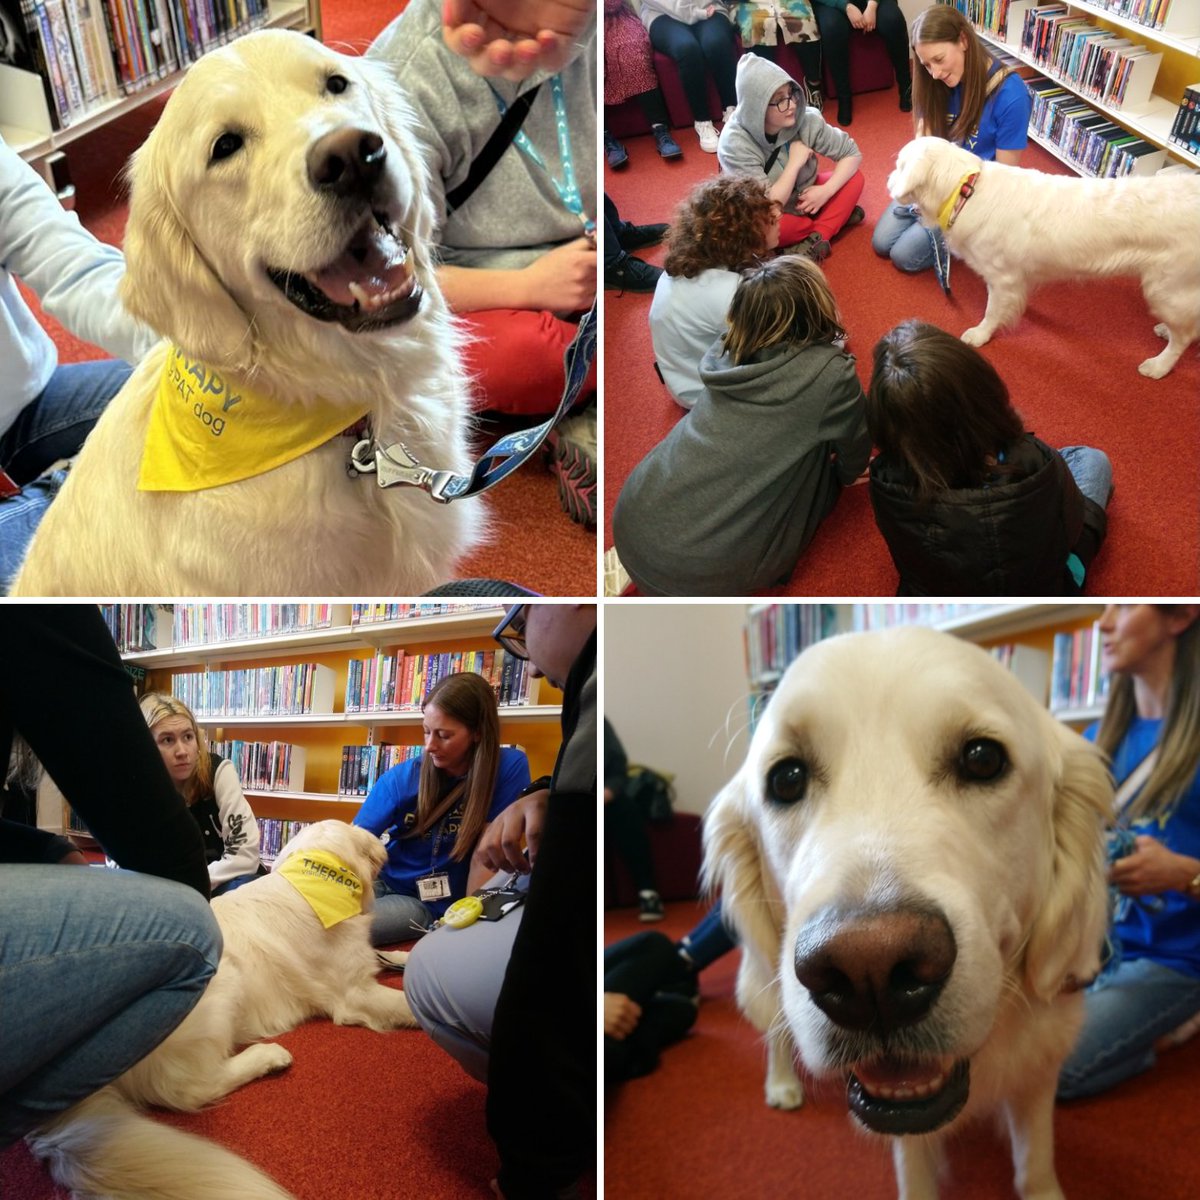 Springfield LRC had the pleasure of welcoming Rocco for our Monday @PetsAsTherapyUK session. This was Rocco's very first visit to an establishment as a qualified PAT Dog and he did exactly what he is trained to do. We all felt super relaxed after the visit. Well done Rocco 👏🐶